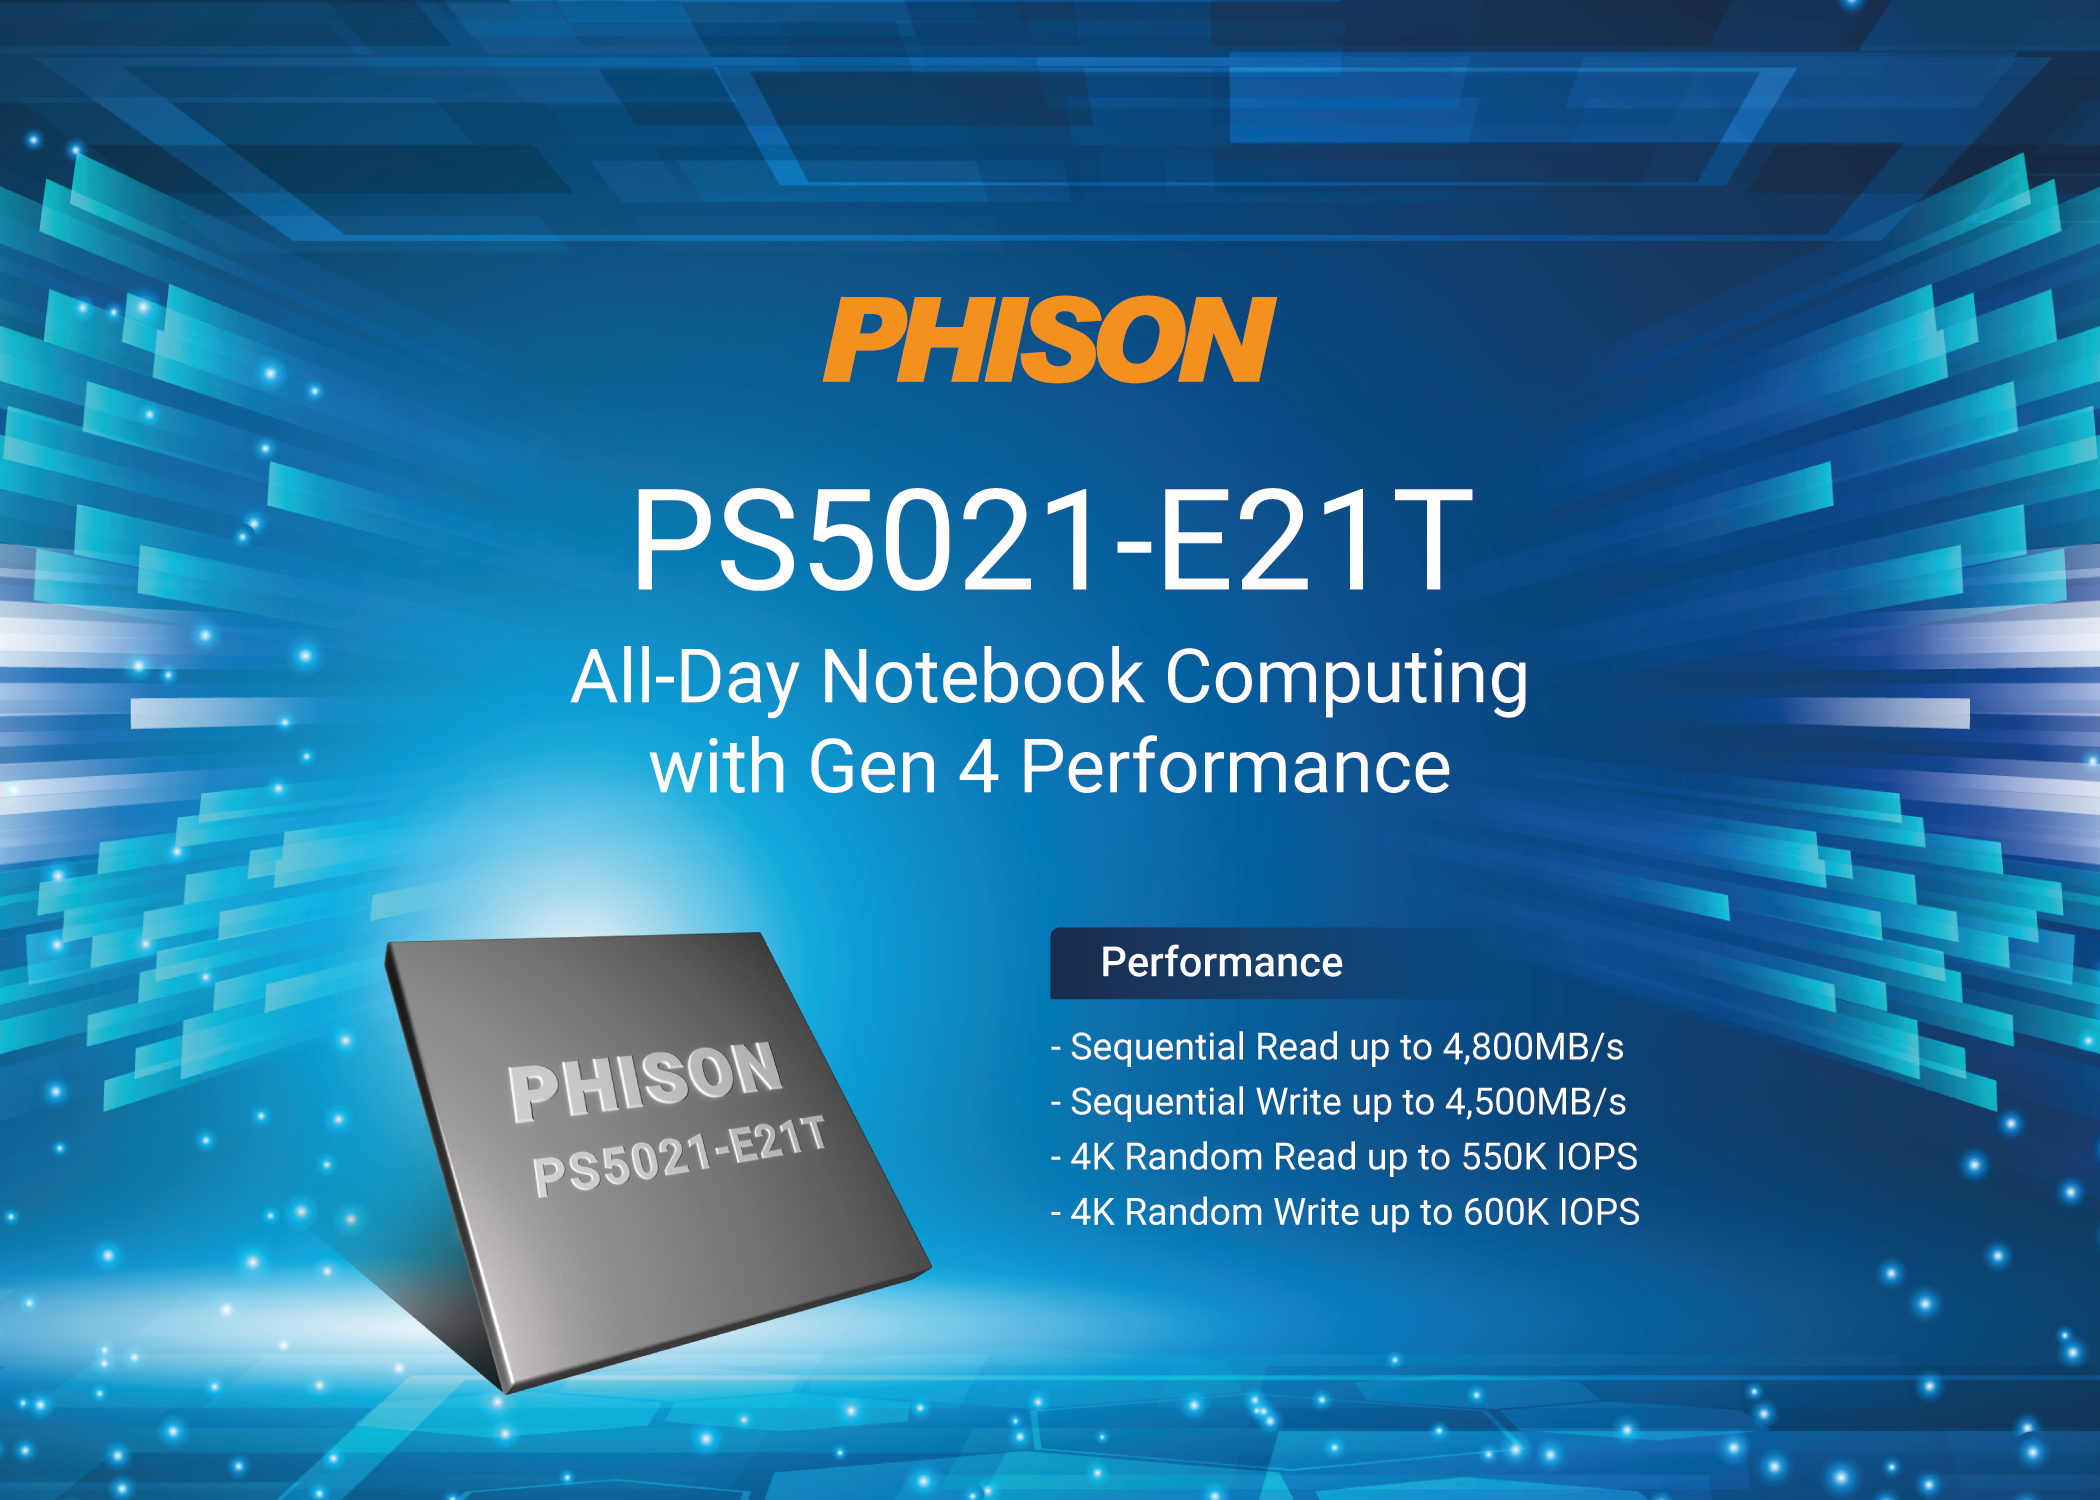 Phison E21T is a budget PCIe 4.0 controller